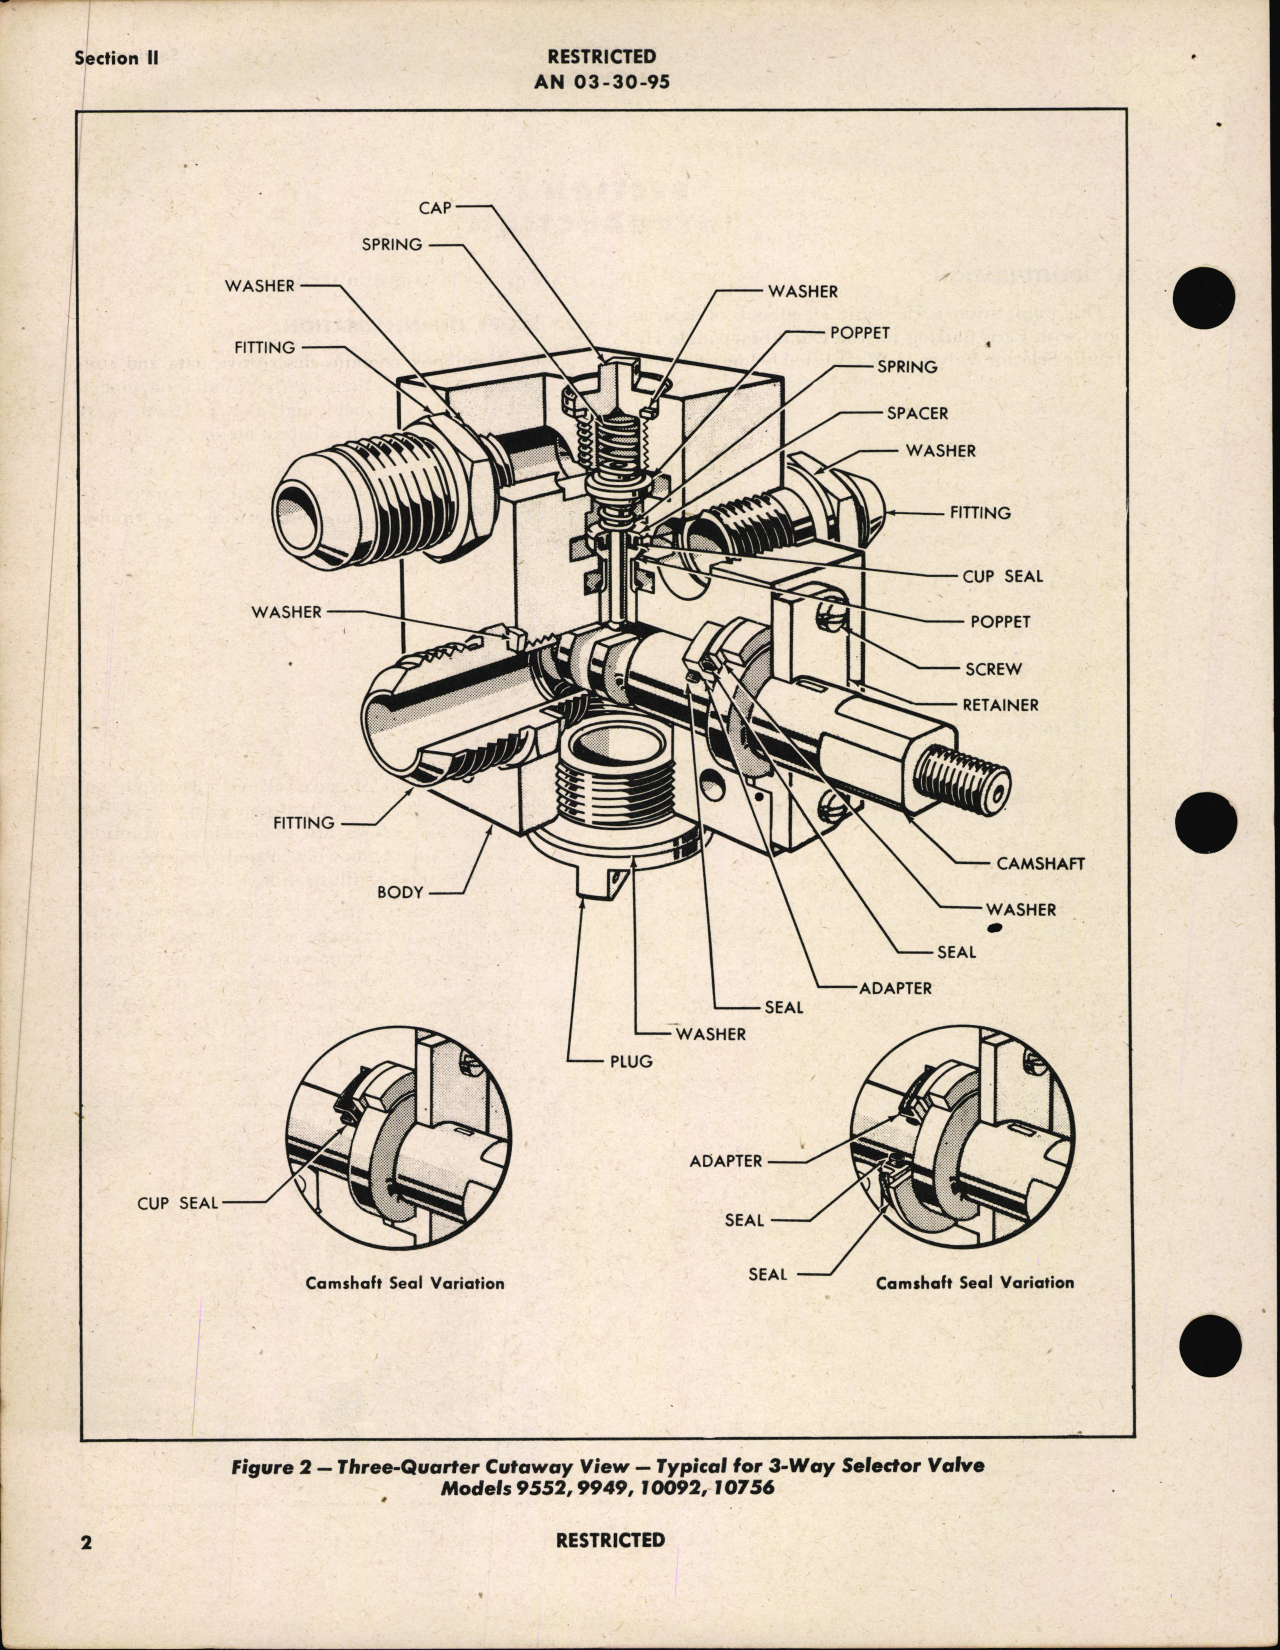 Sample page 6 from AirCorps Library document: Handbook of Instructions with Parts Catalog for Dural Seat Singly Hydraulic Selector Valves (3 Way)